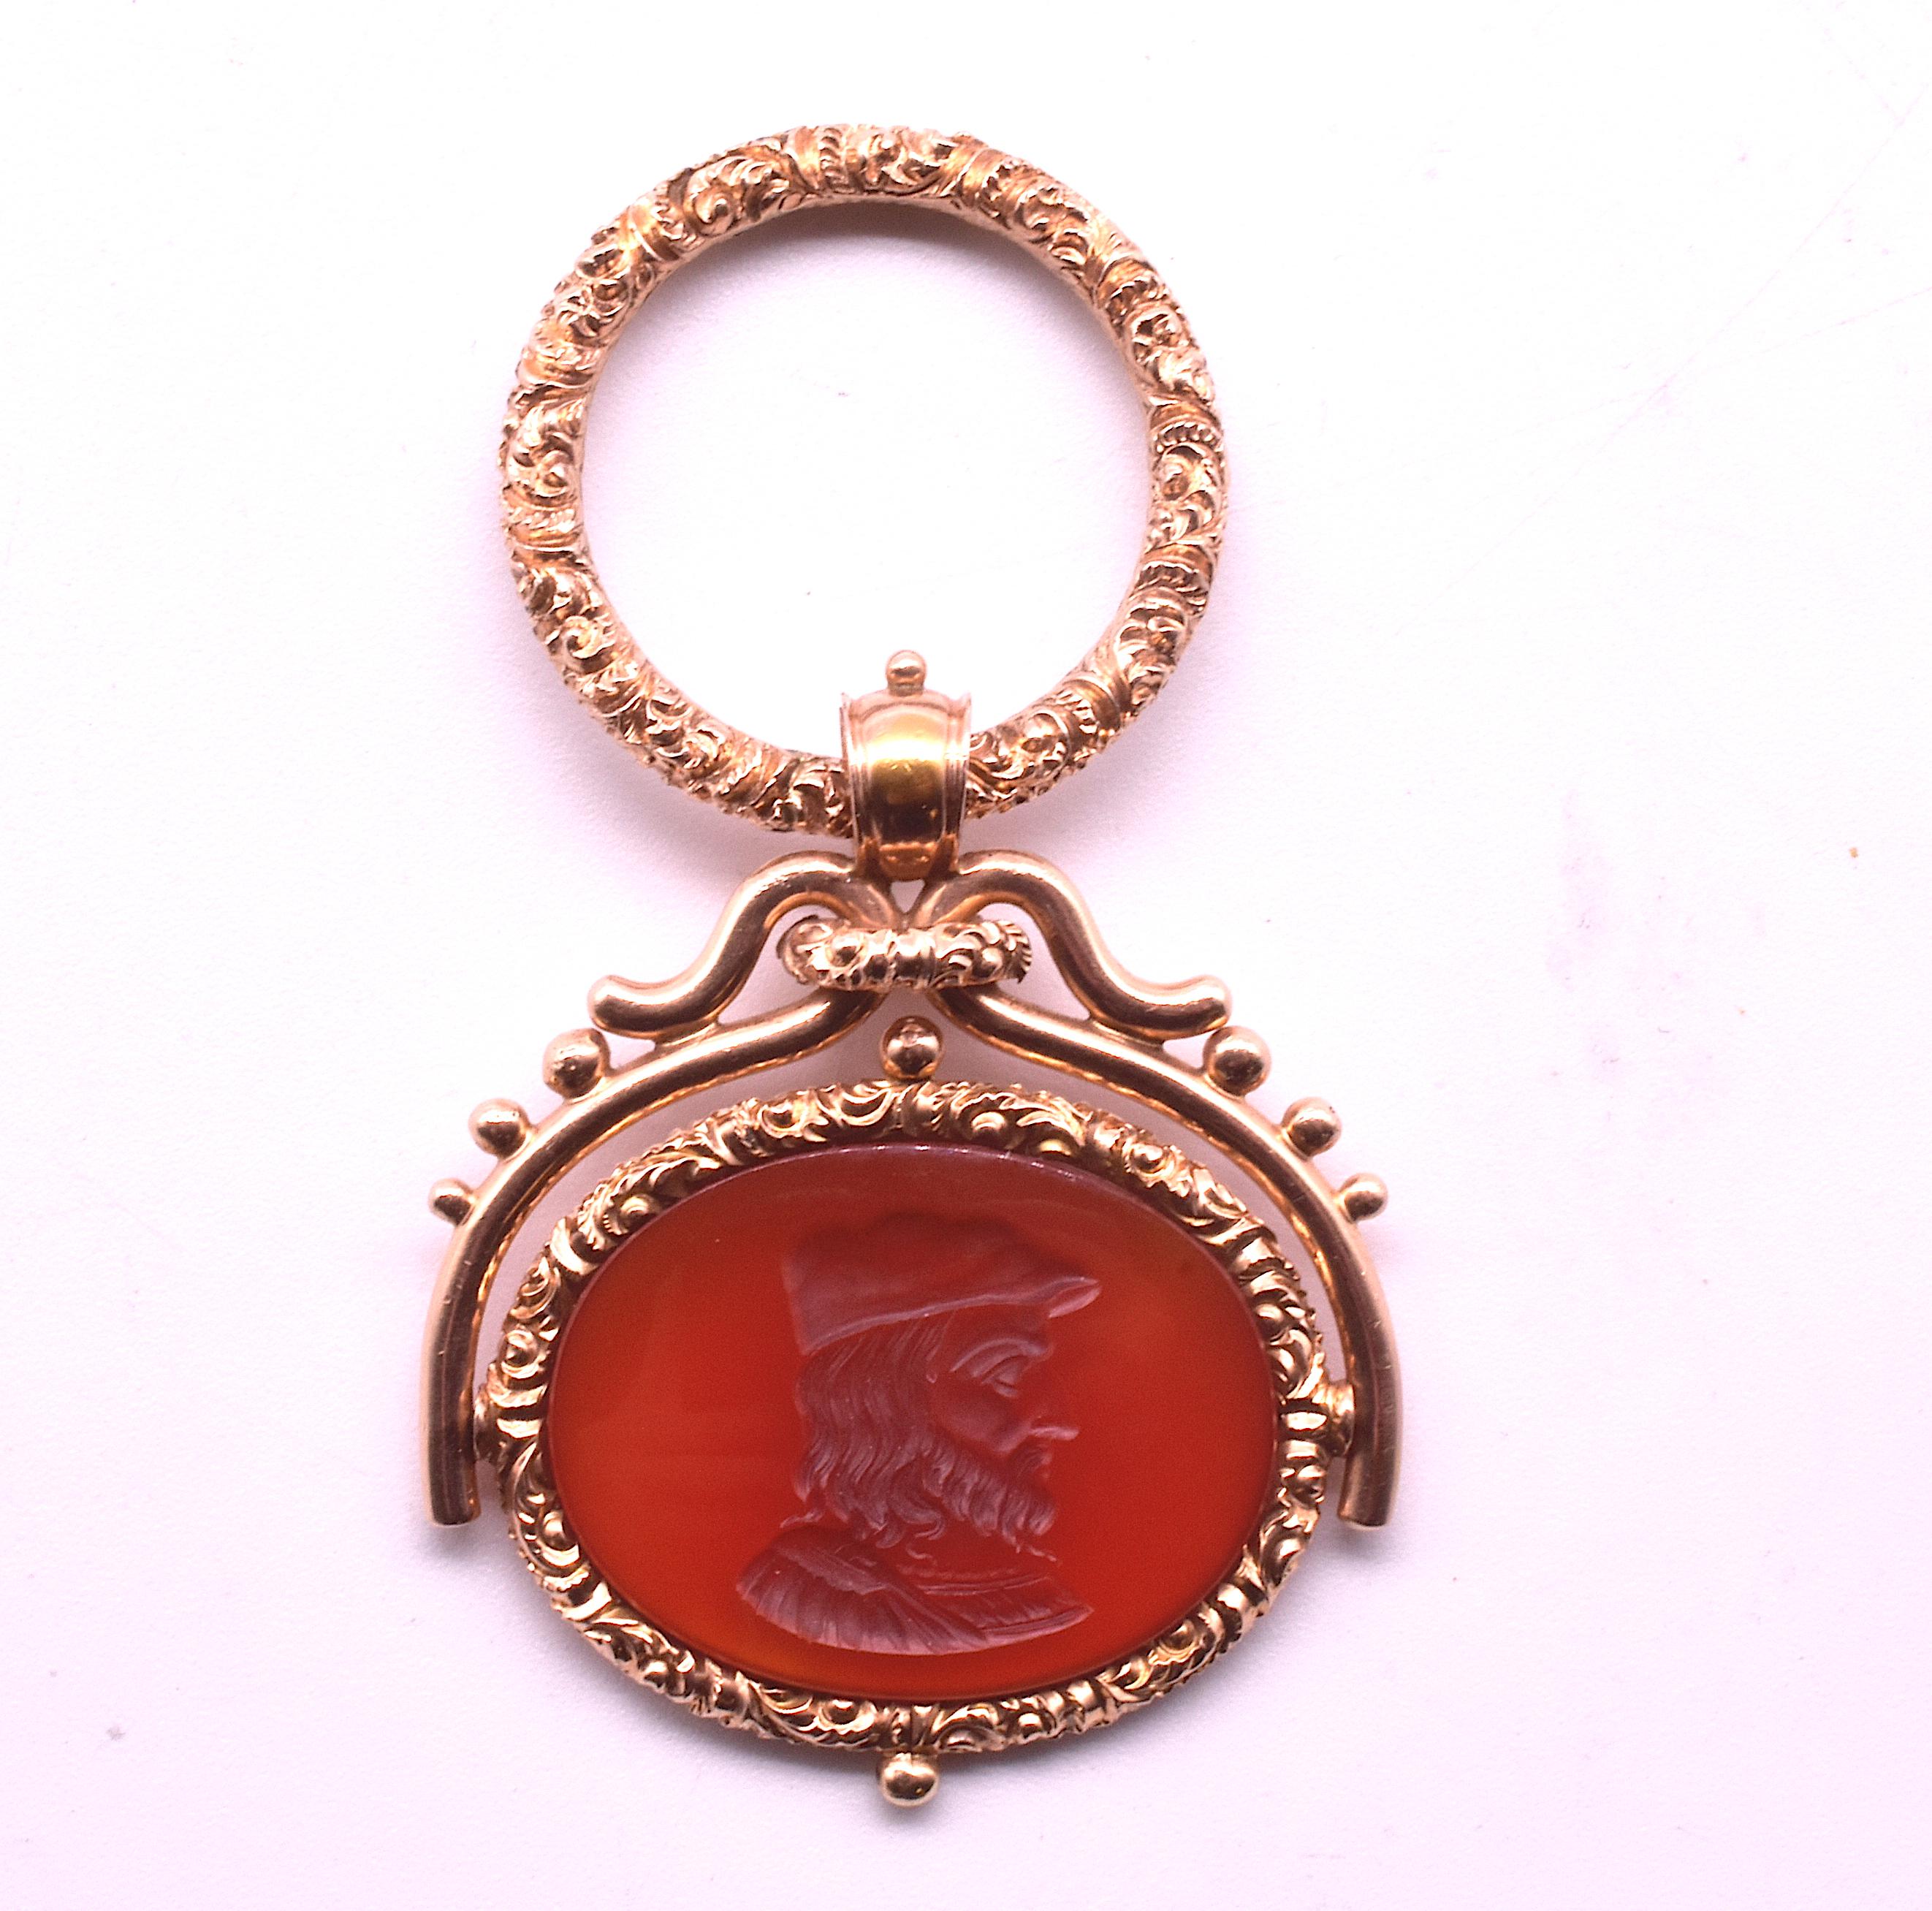 Regency Period, circa 1820 fob seal with a translucent image of an 18th century bearded man in a beret, perhaps robed. This swivel fob is 1 1/4 inches in width with a beauifully carved repousse jump ring that is just shy of 1 inch. This is really a